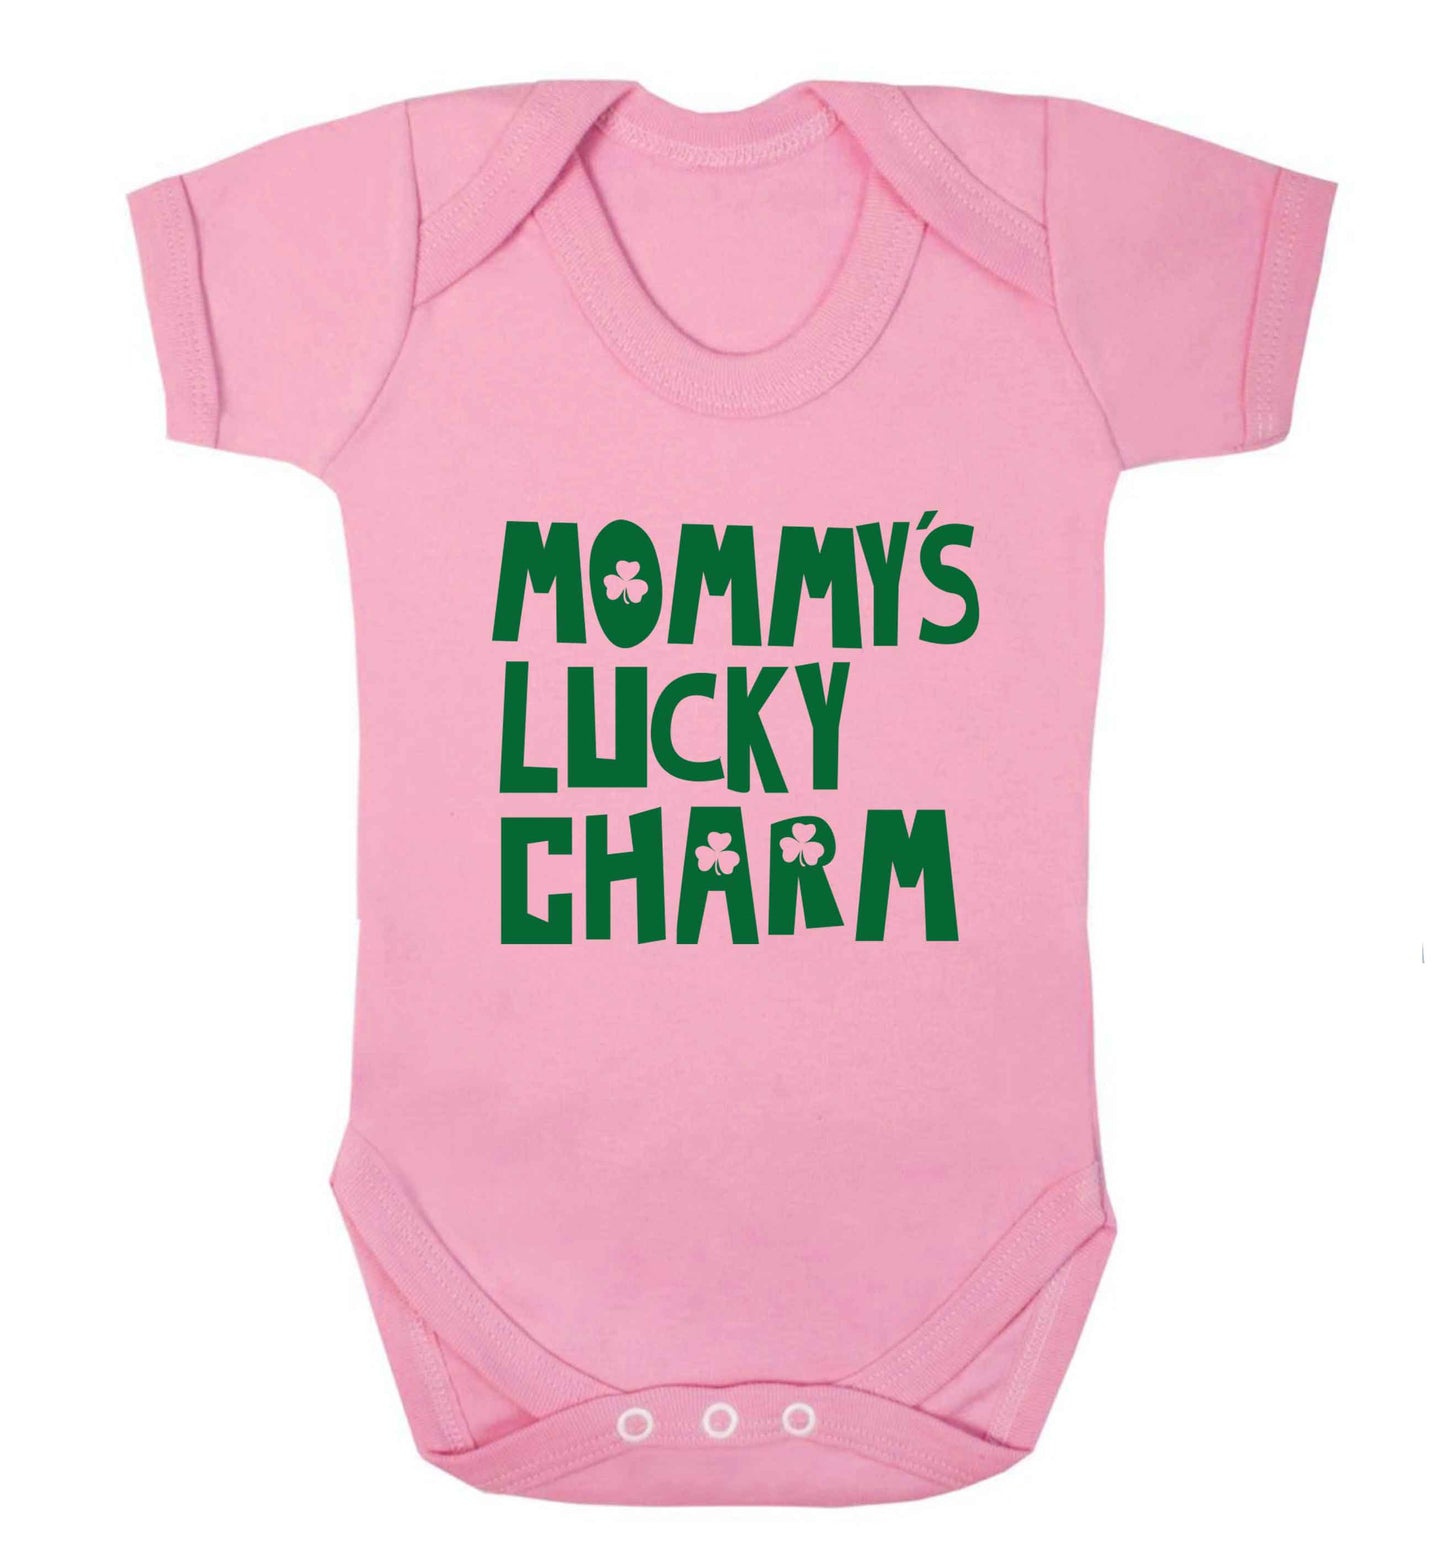 Mommy's lucky charm baby vest pale pink 18-24 months